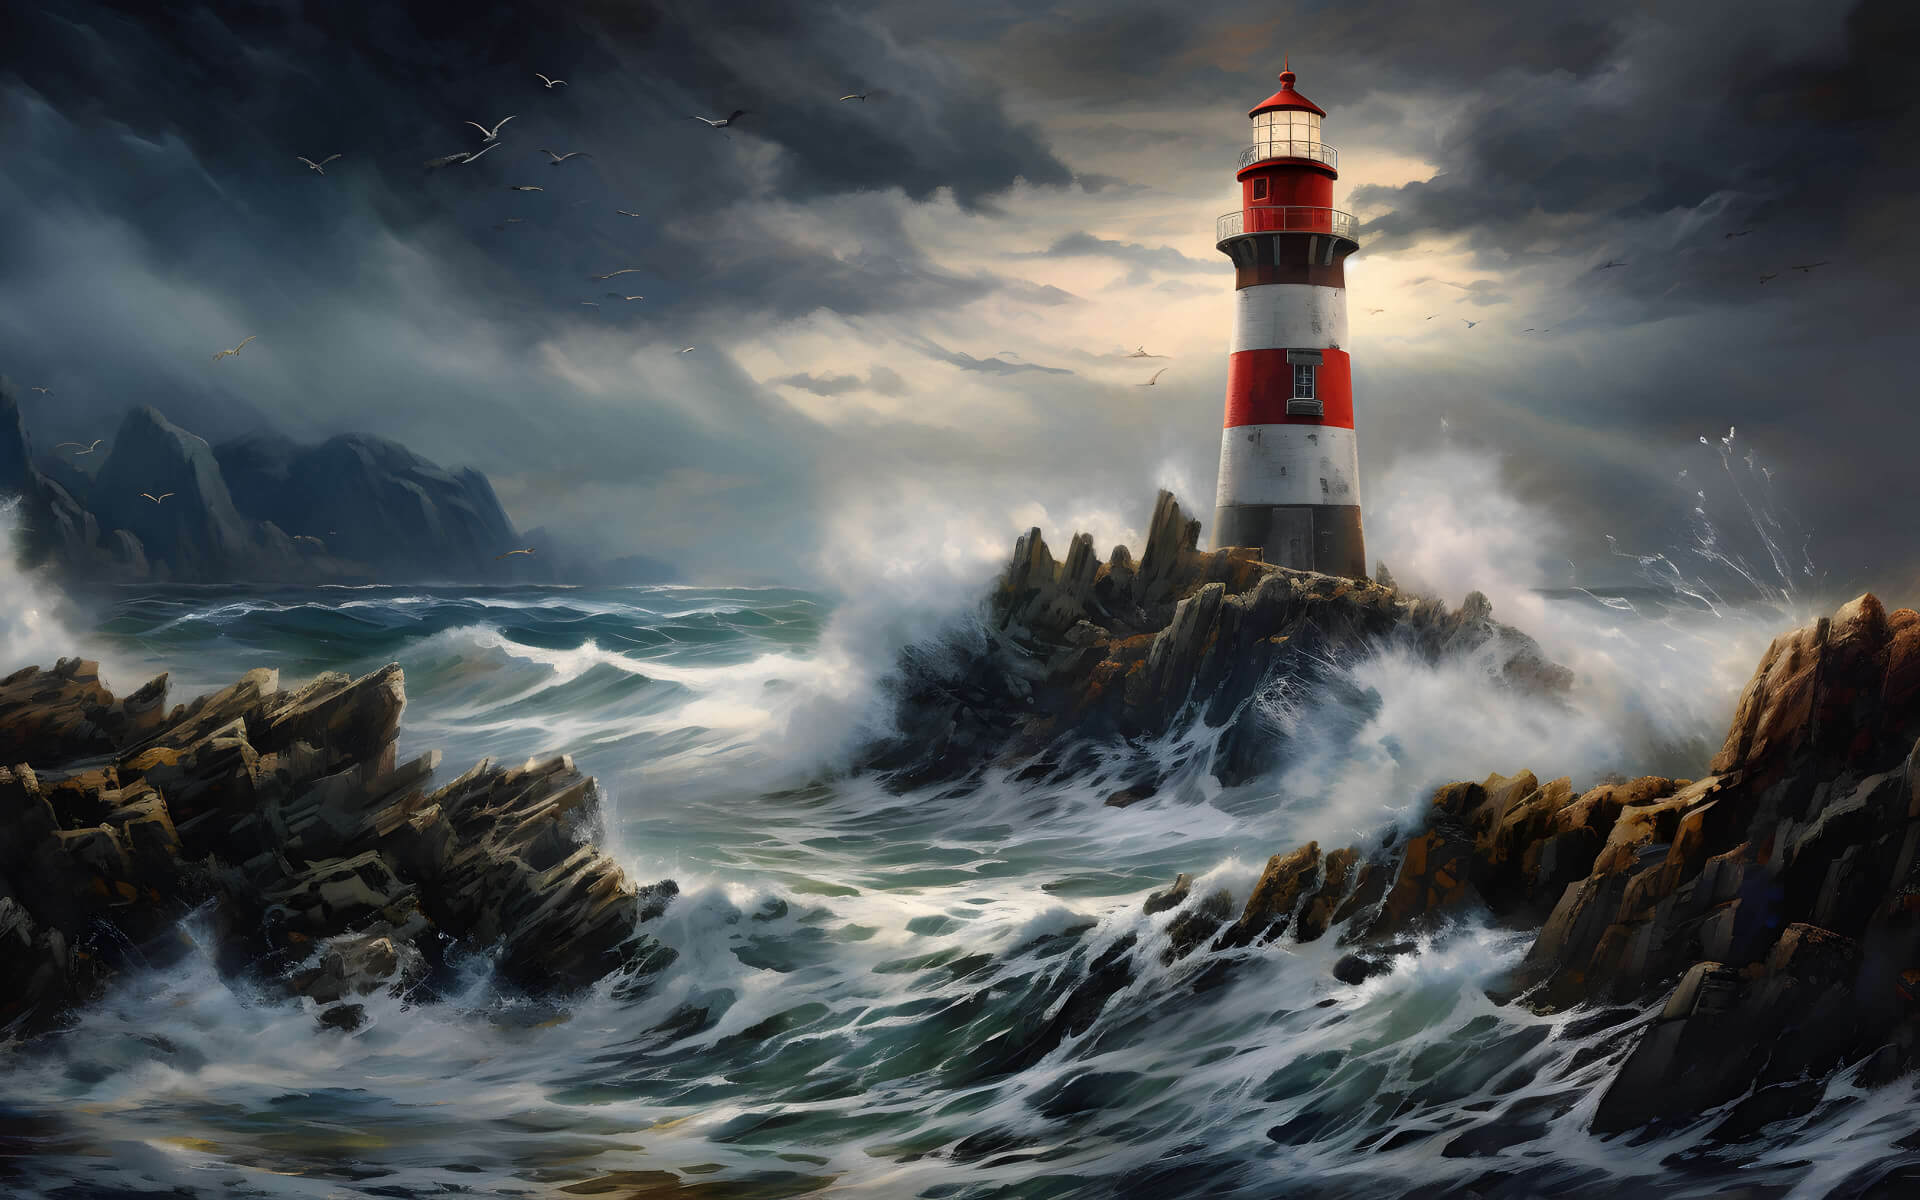 Lighthouse in the ocean waves wallpaper 1680x1050